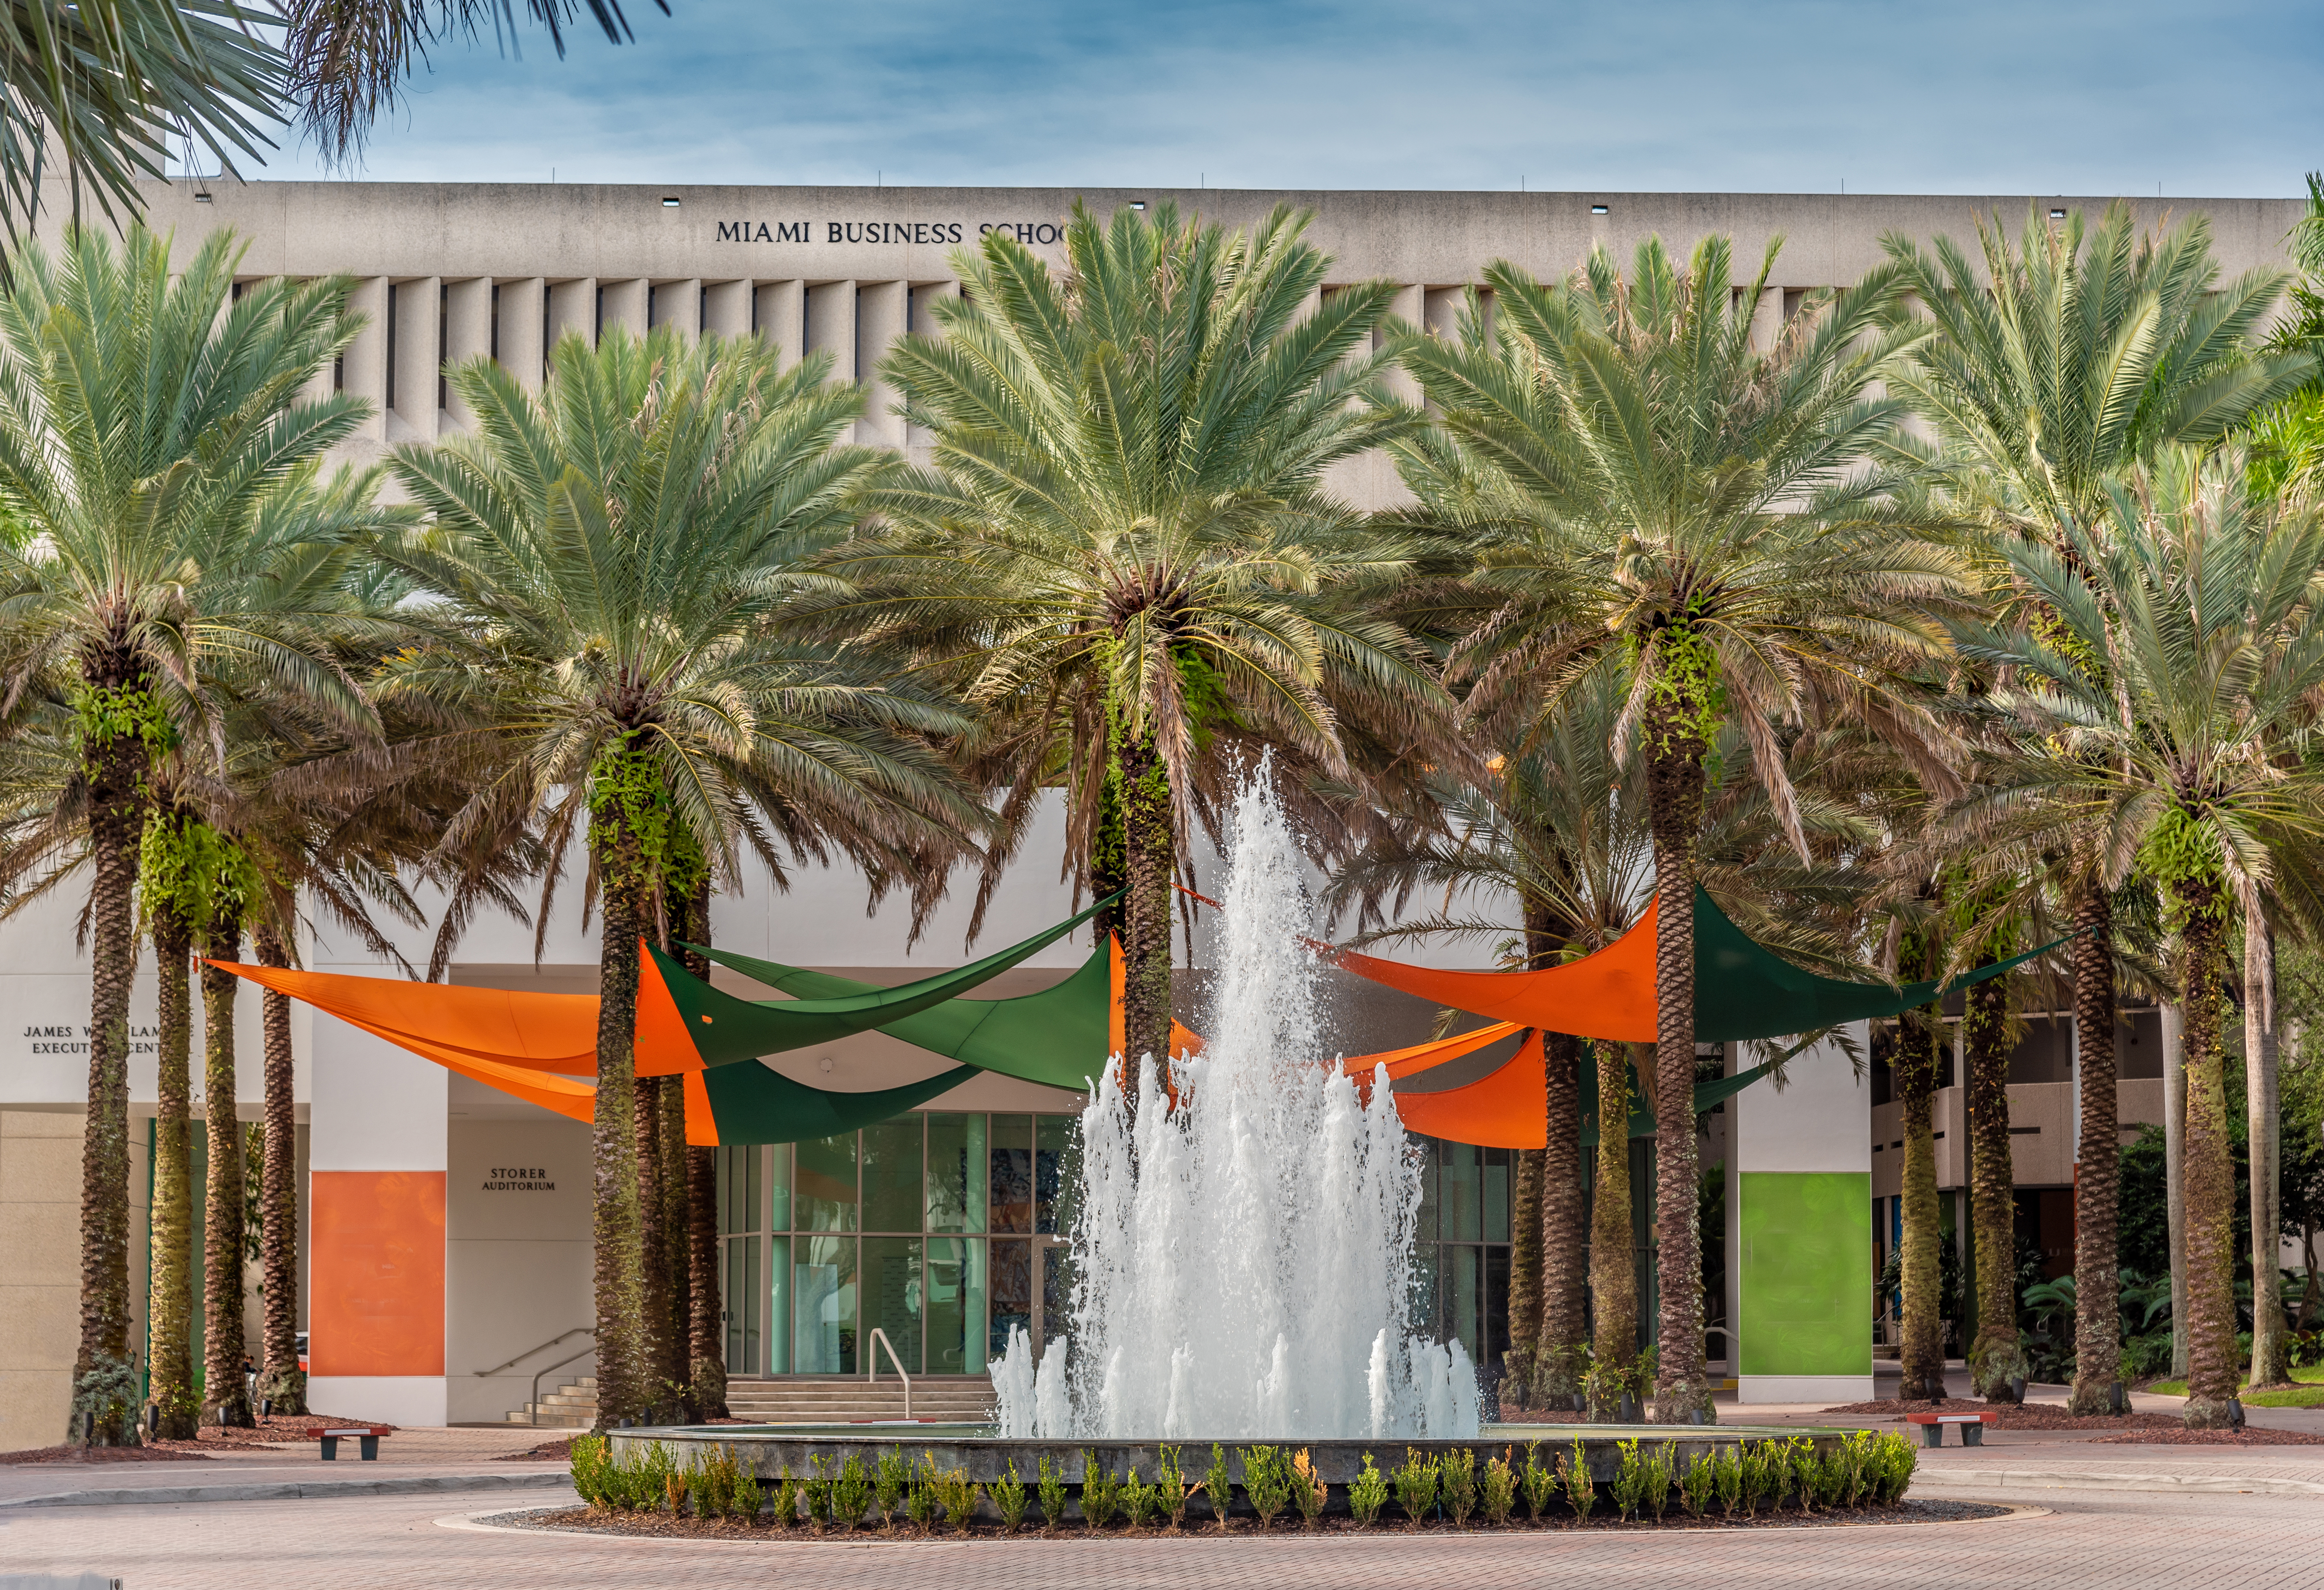 View of a fountain with palm trees, a building, and orange and green banners in the background.